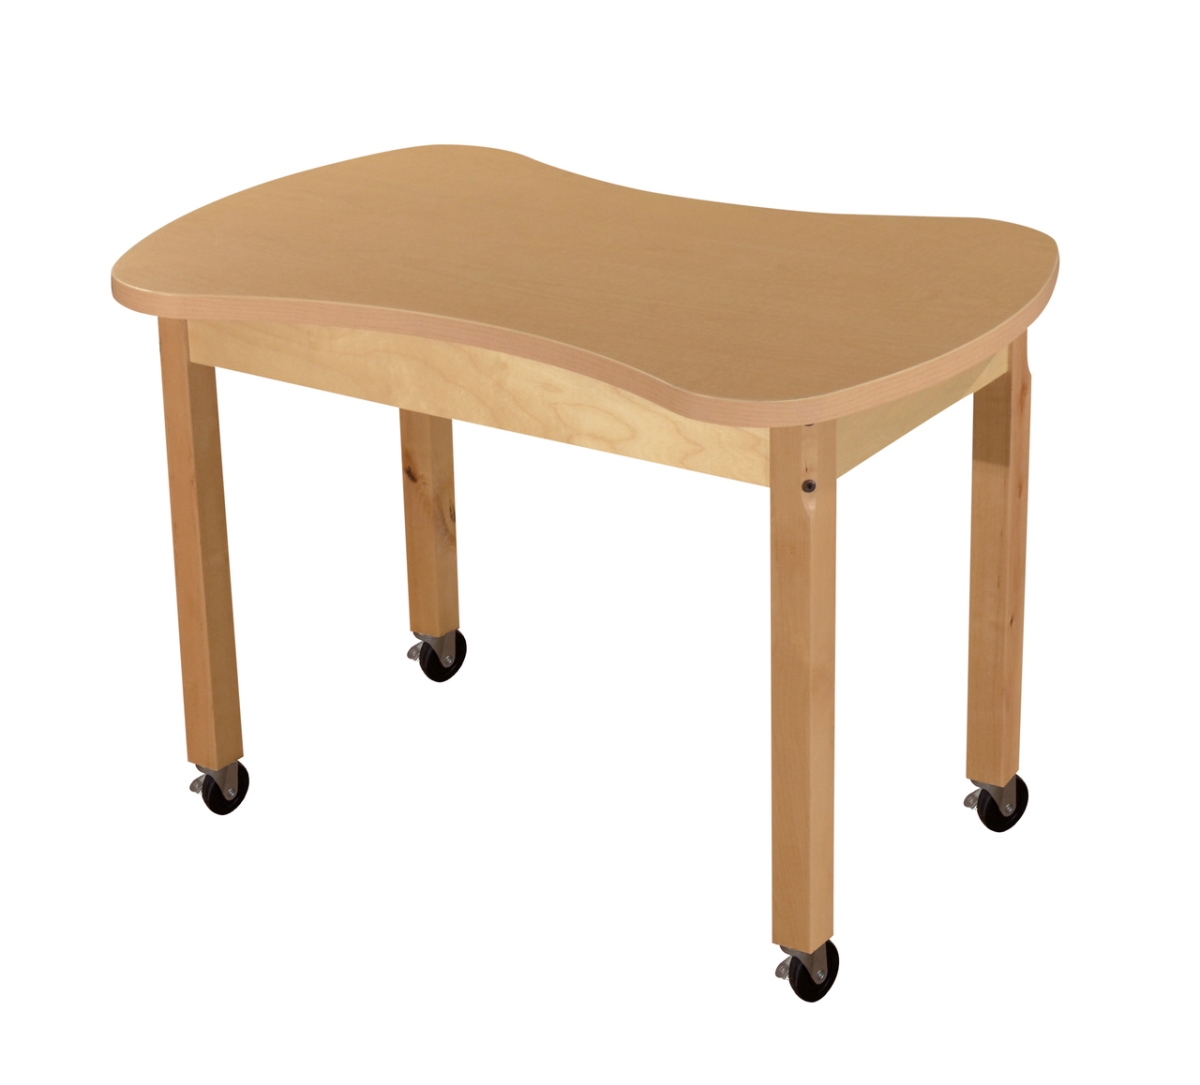 Picture of Wood Designs HPL2436C18C6 24 x 36 in. Mobile Synergy Junction, High Pressure Laminate Table with Hardwood Legs - 18 in.